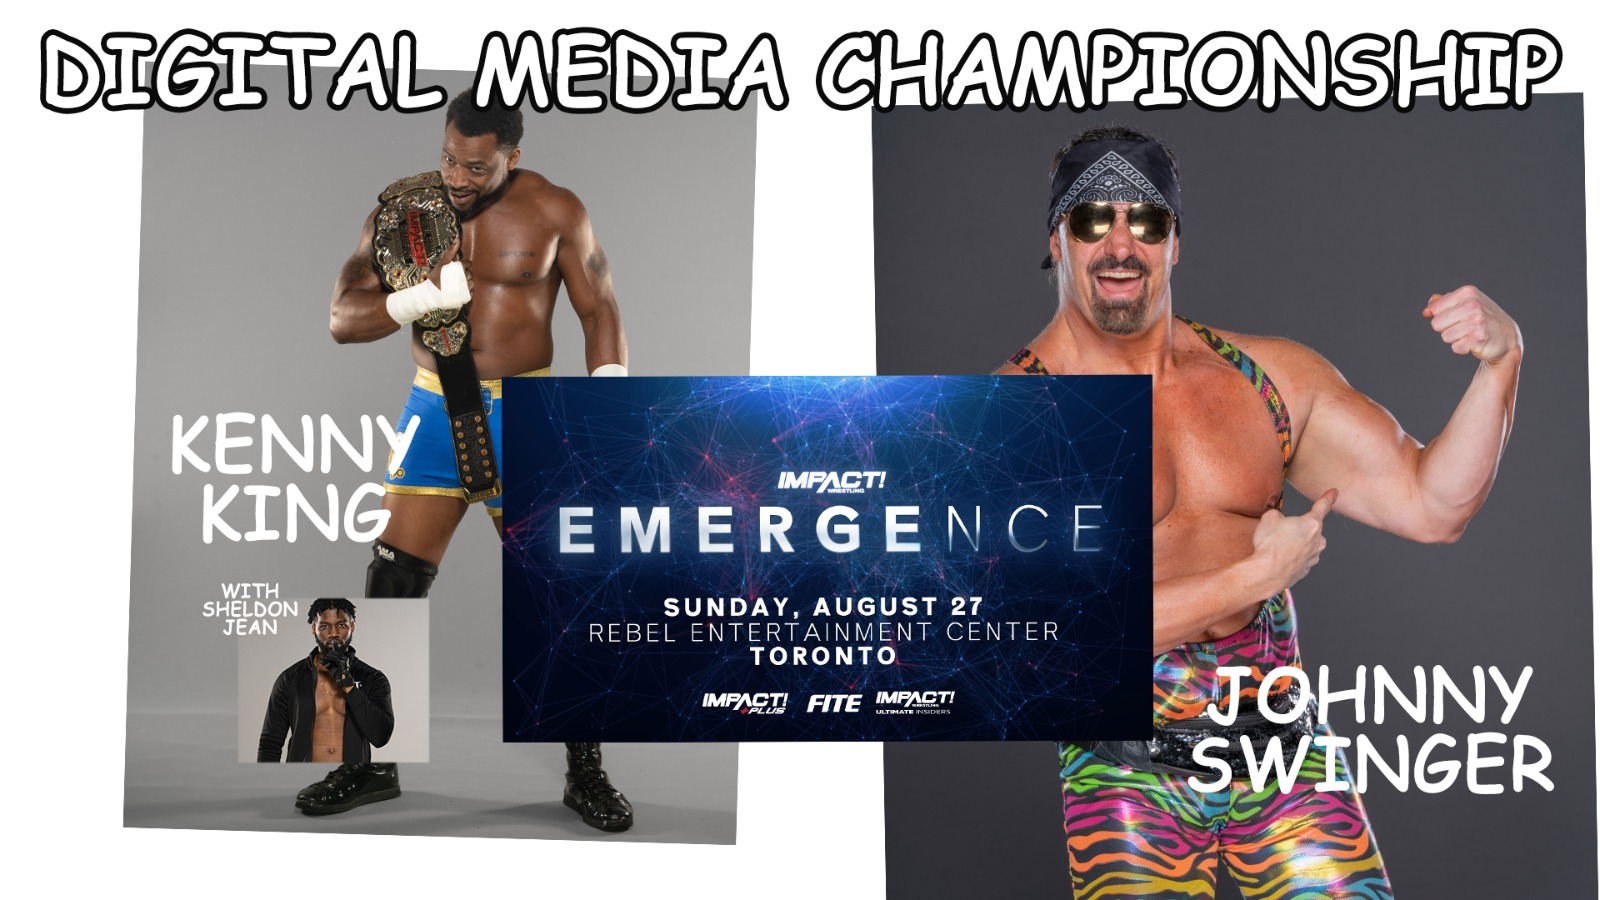 Johnny Swinger Looks to Complete His Quest and Become Digital Media Champion at Emergence – IMPACT Wrestling